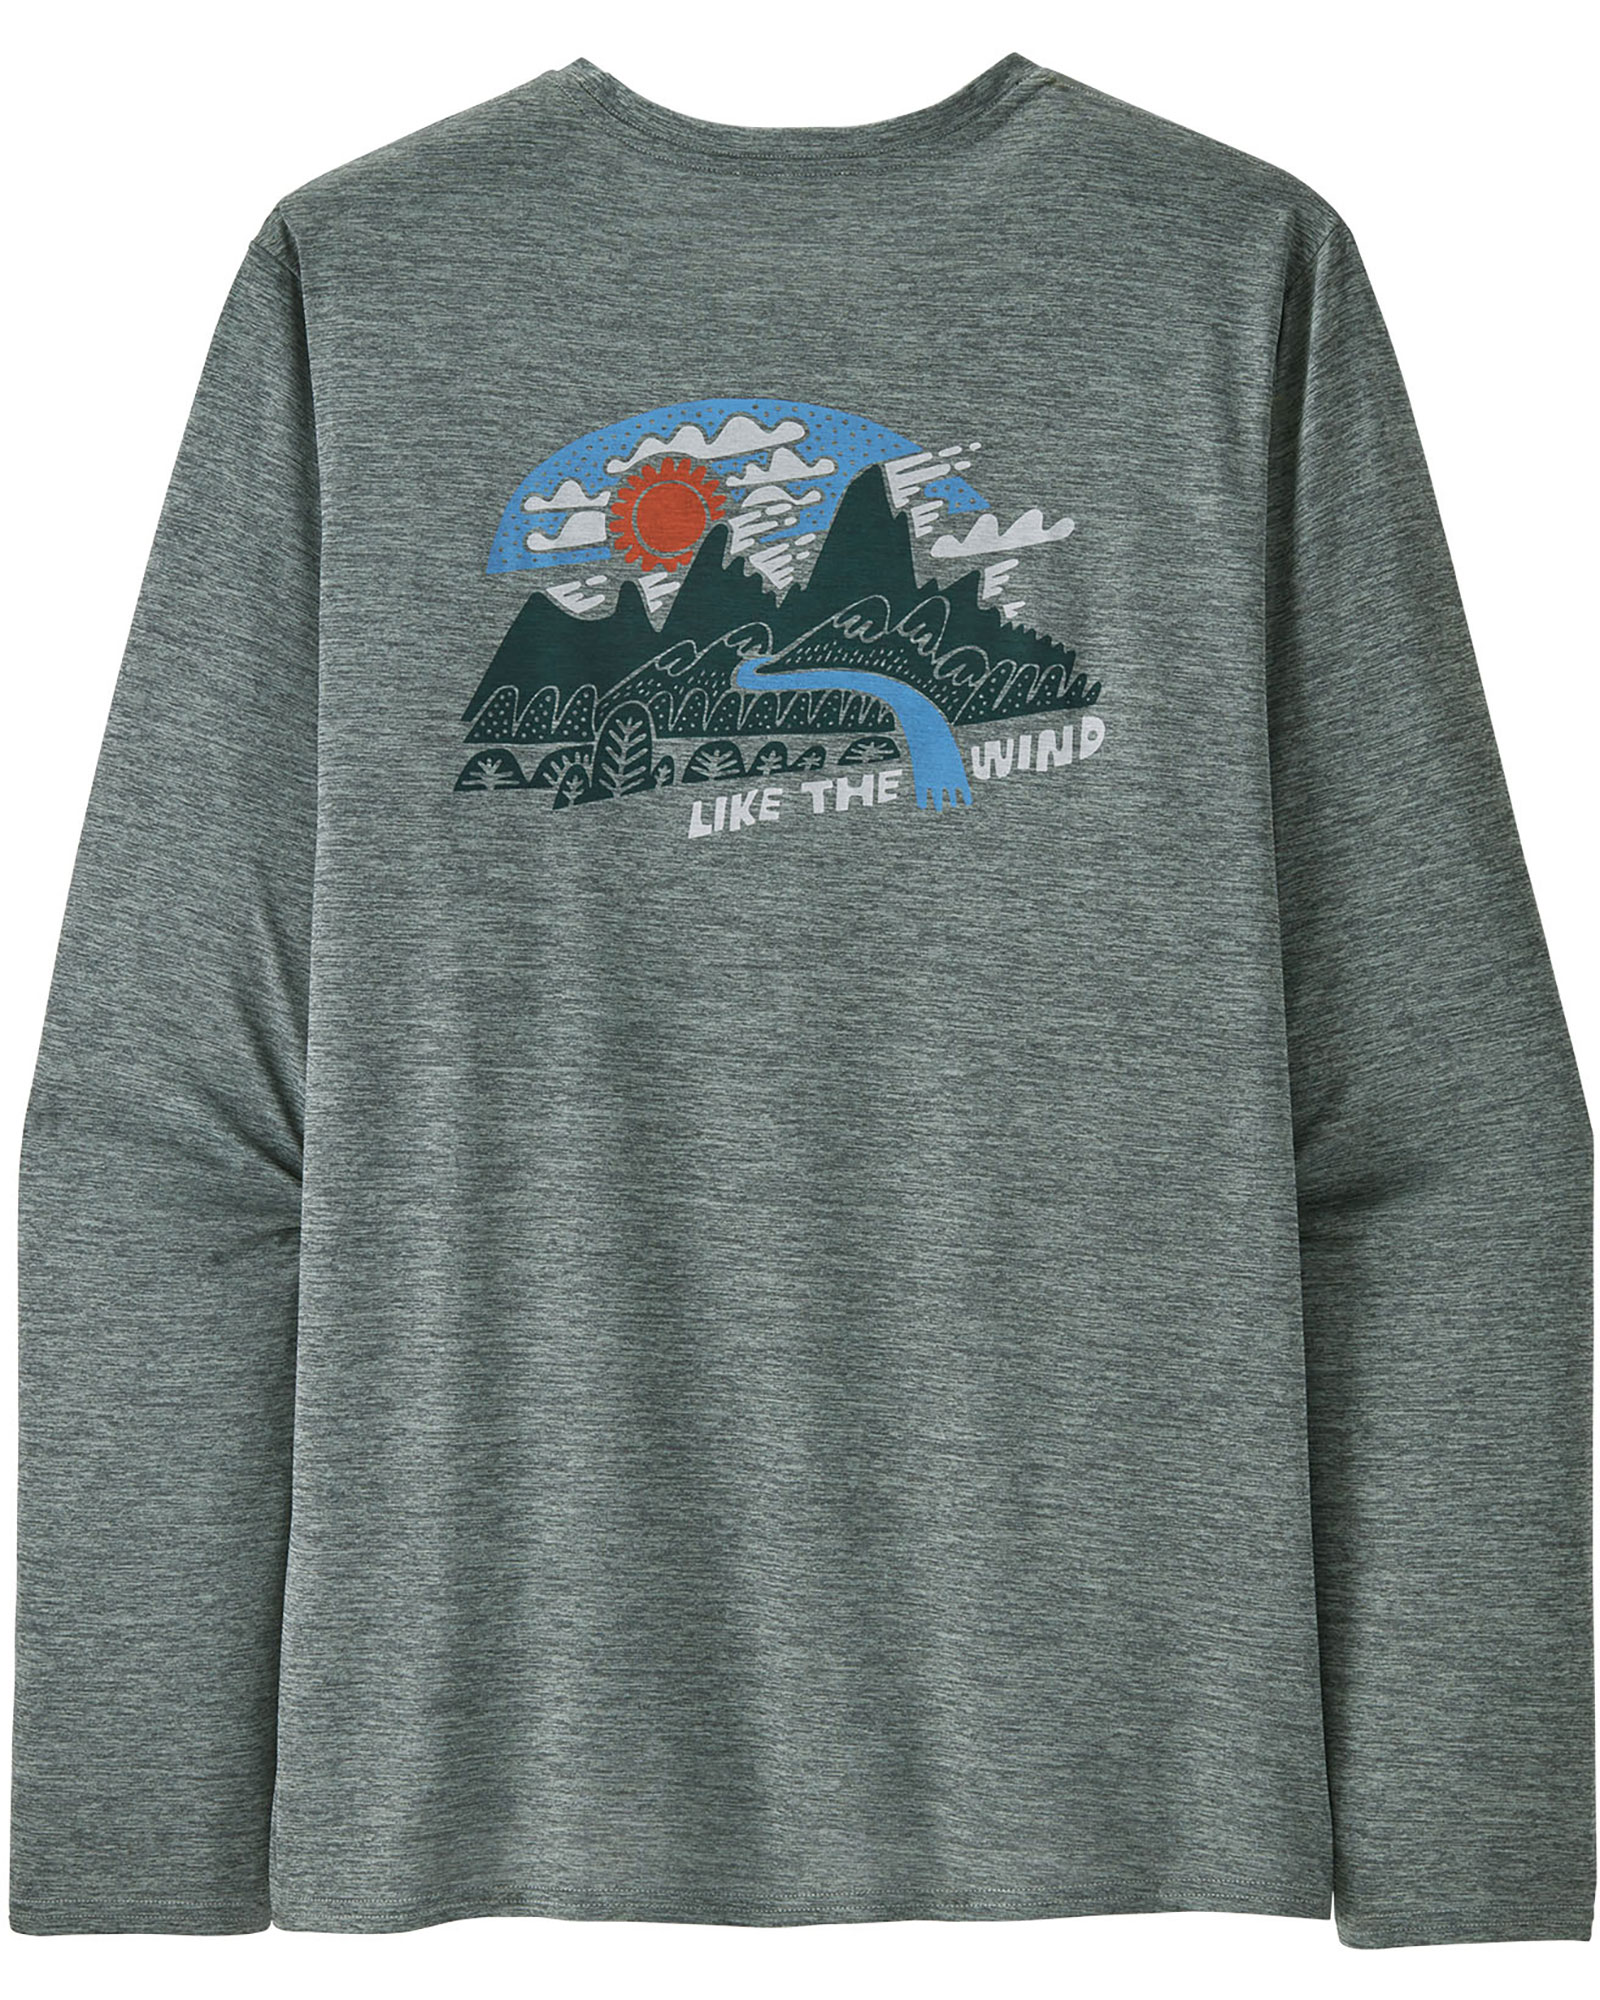 Patagonia Men’s Cap Cool Daily Graphic Long Sleeved Shirt - Like the Wind:Sleet Green X-Dye L